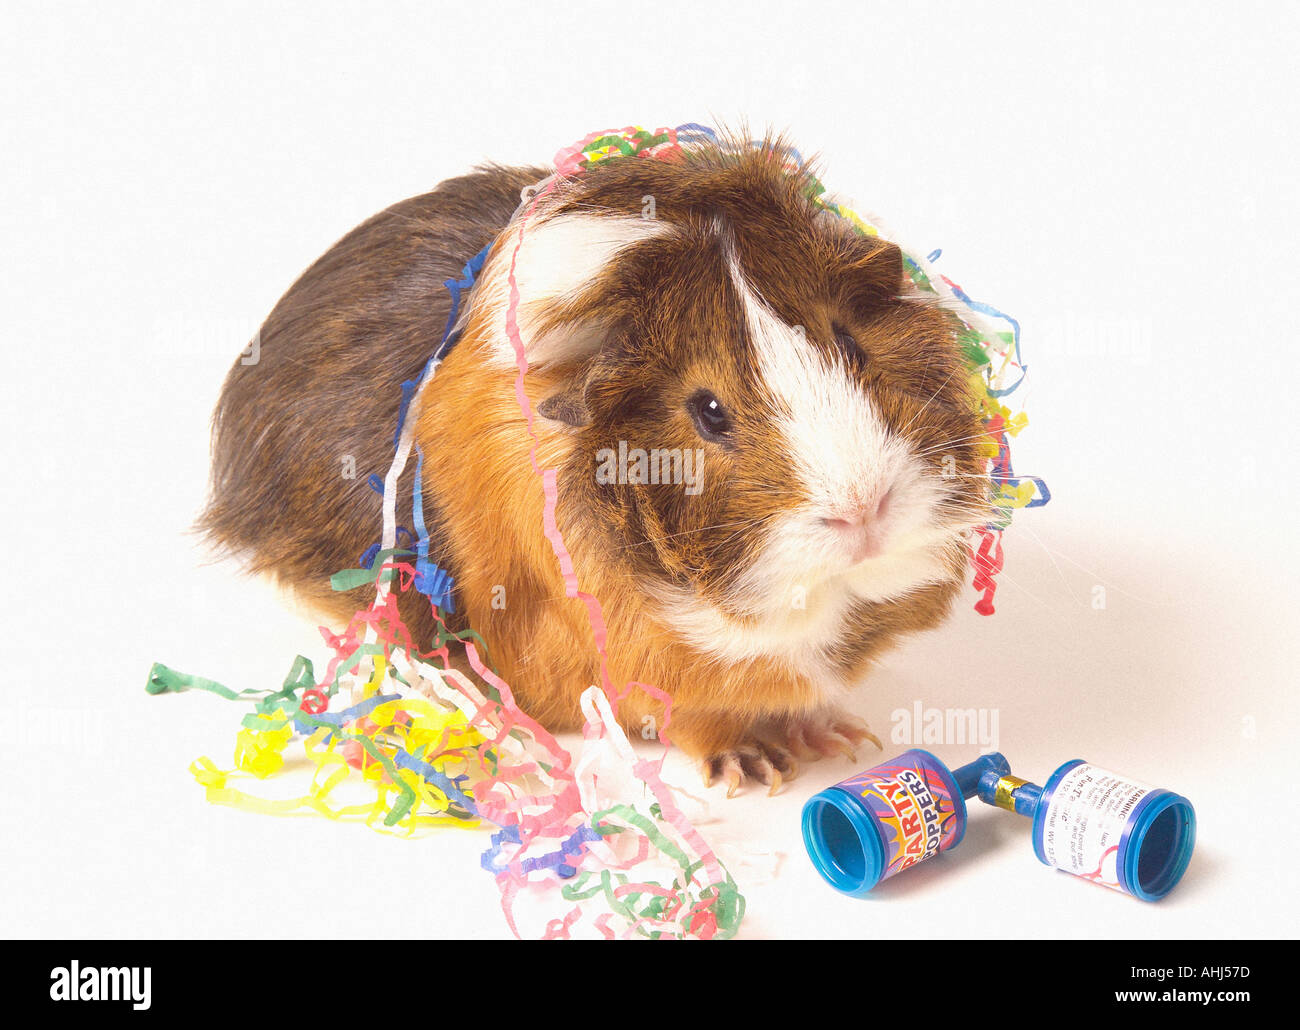 Guinea pig with party poppers and streamers on plain white background Stock Photo